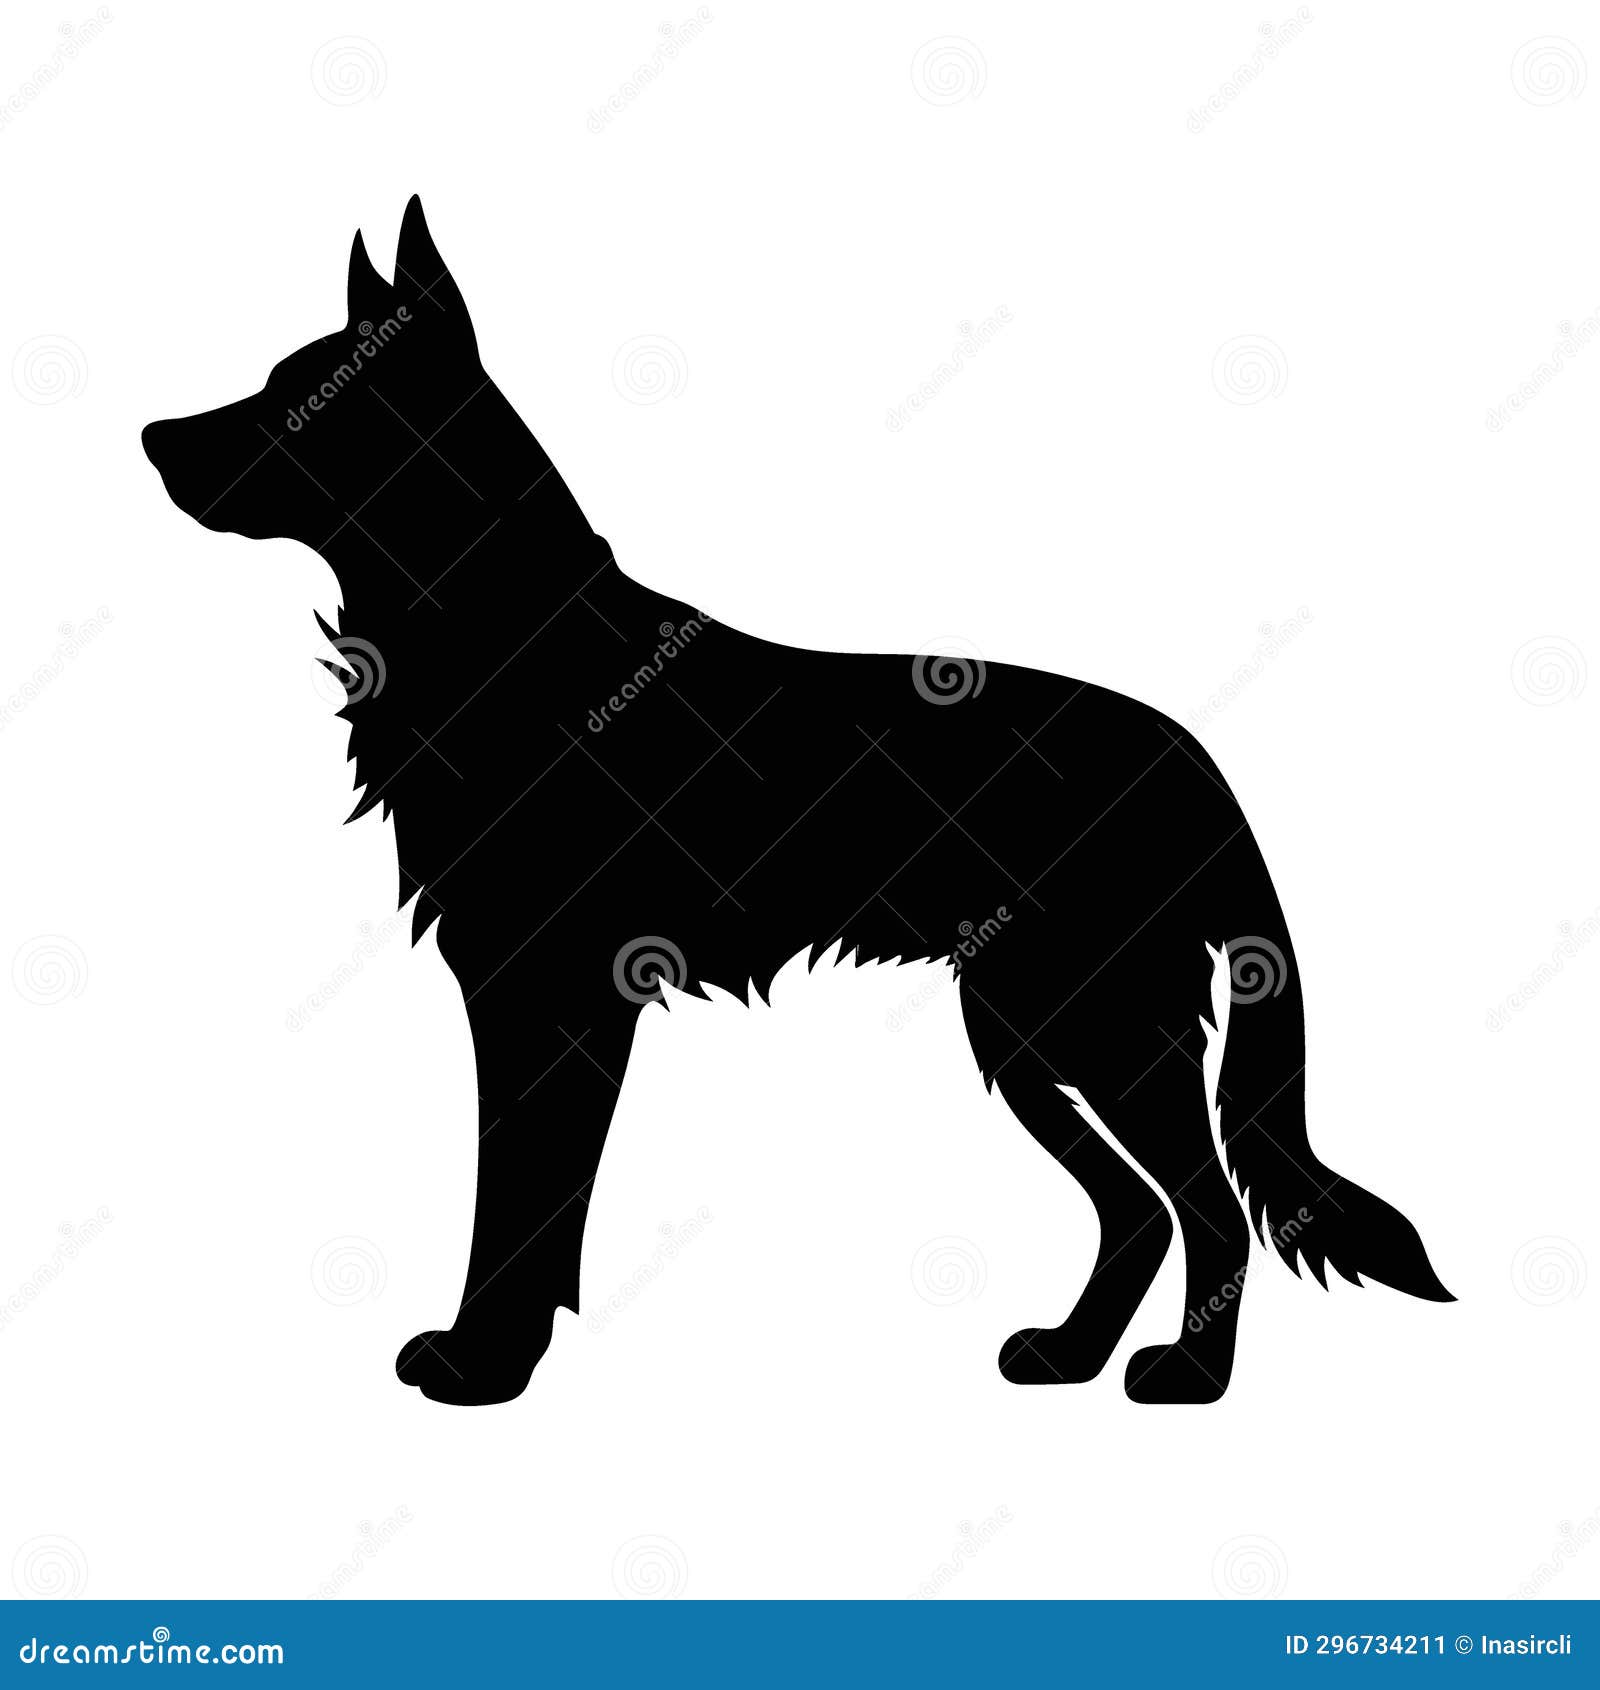 Black silhouette of a Dog stock vector. Illustration of domestic ...